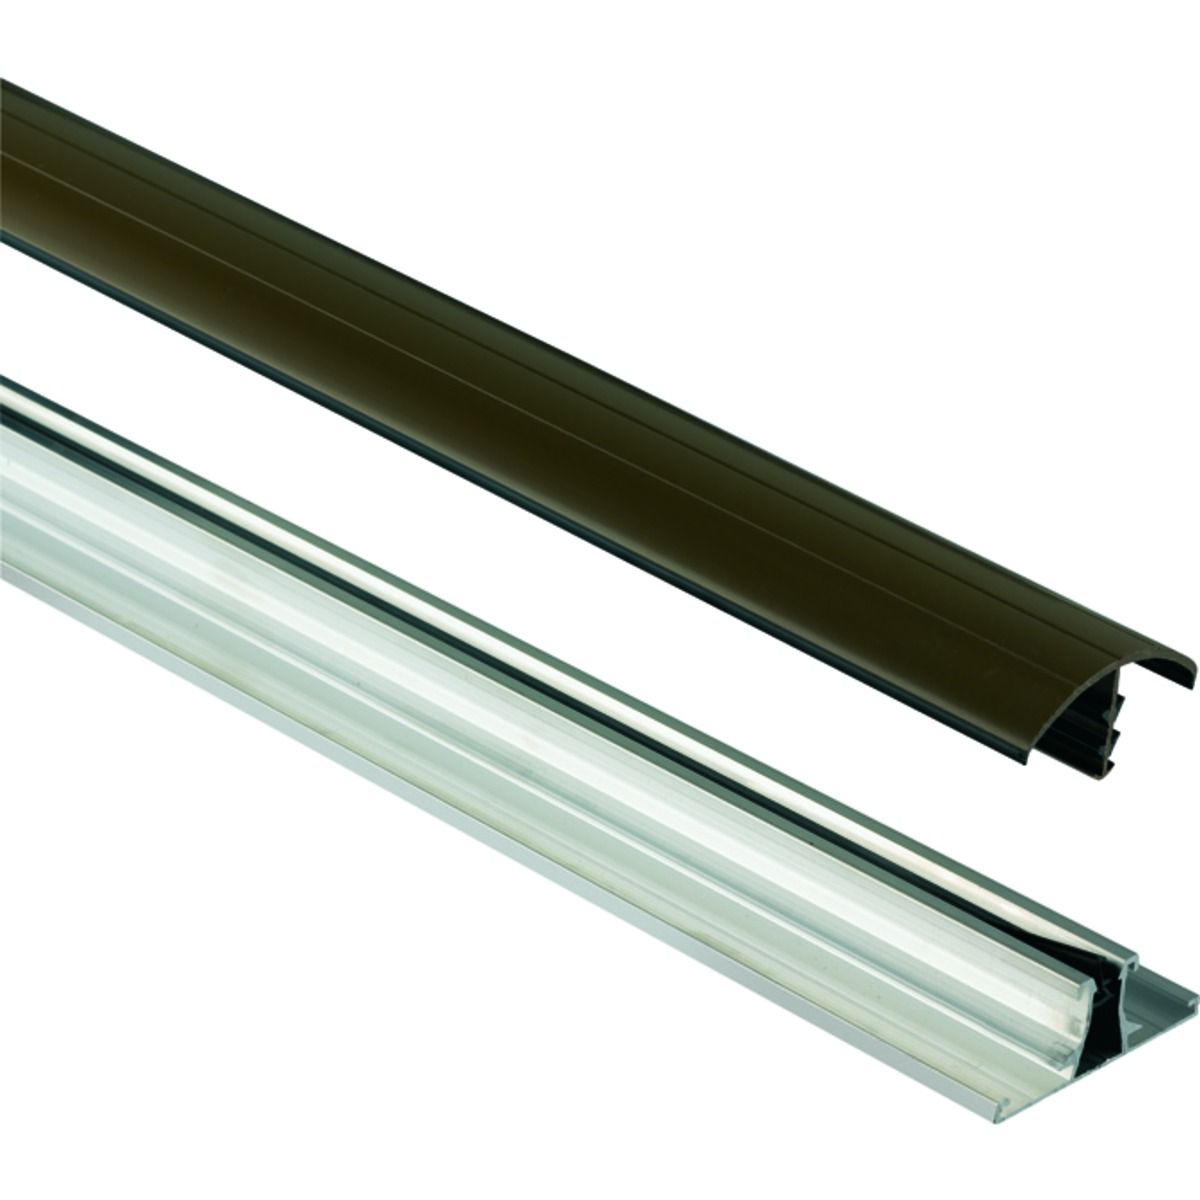 Image of Wickes Universal Glazing Bar for Polycarbonate Sheets - Brown 3m